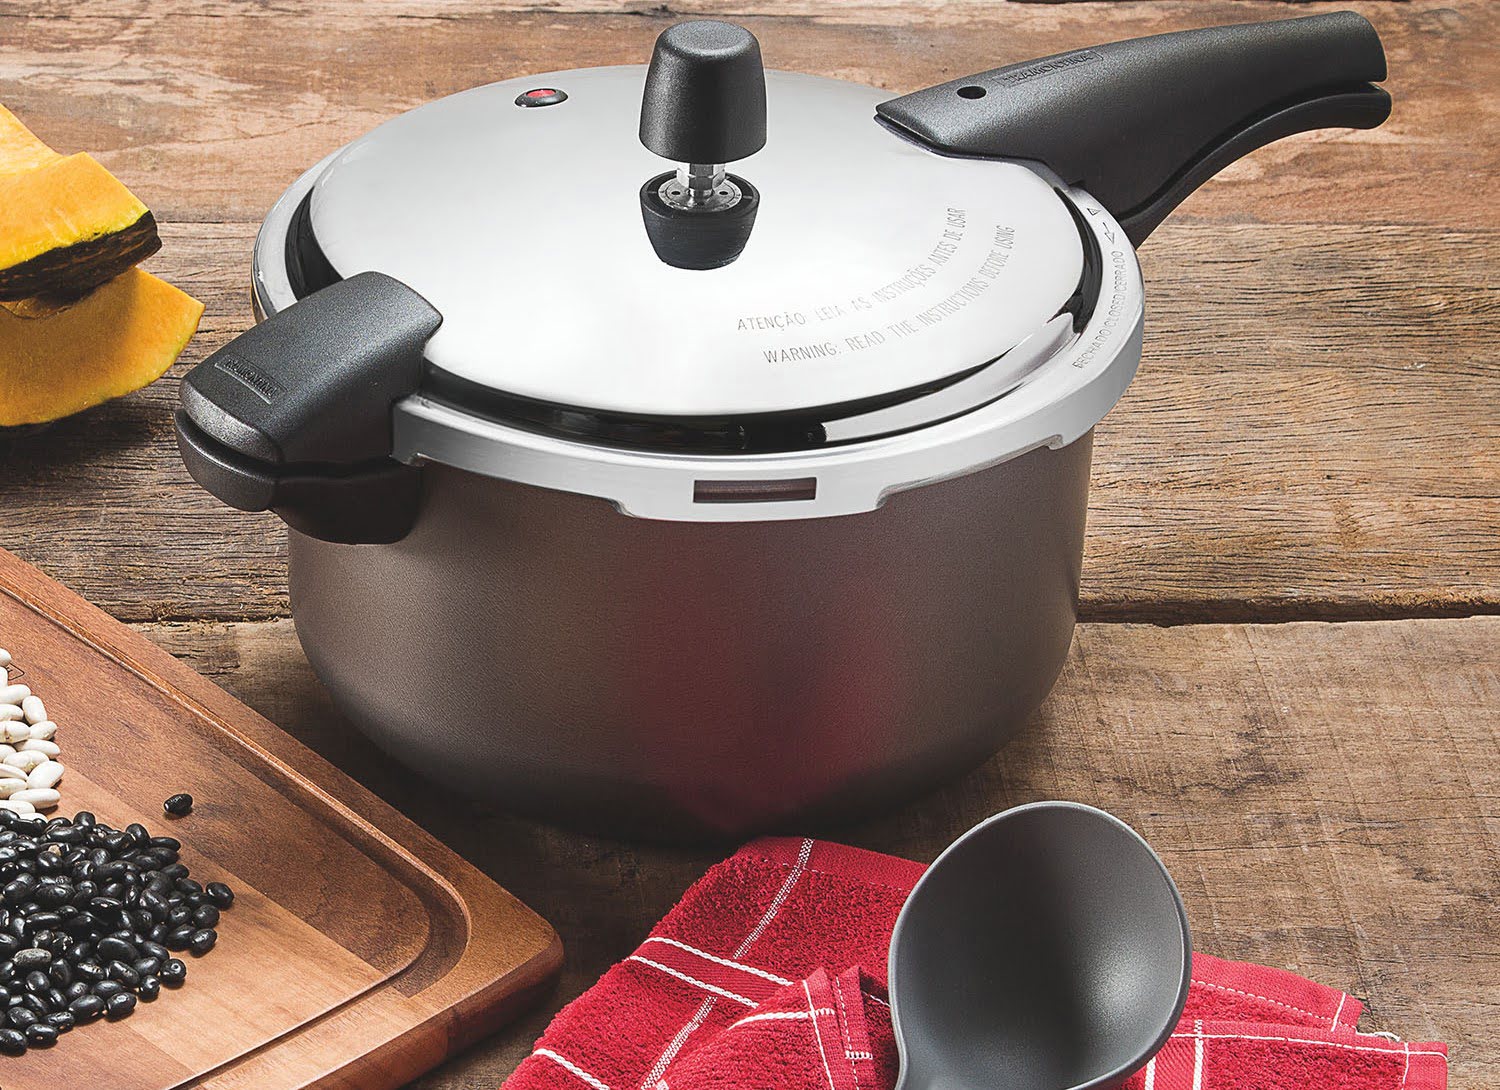 How To Use The Tramontina Electric Pressure Cooker